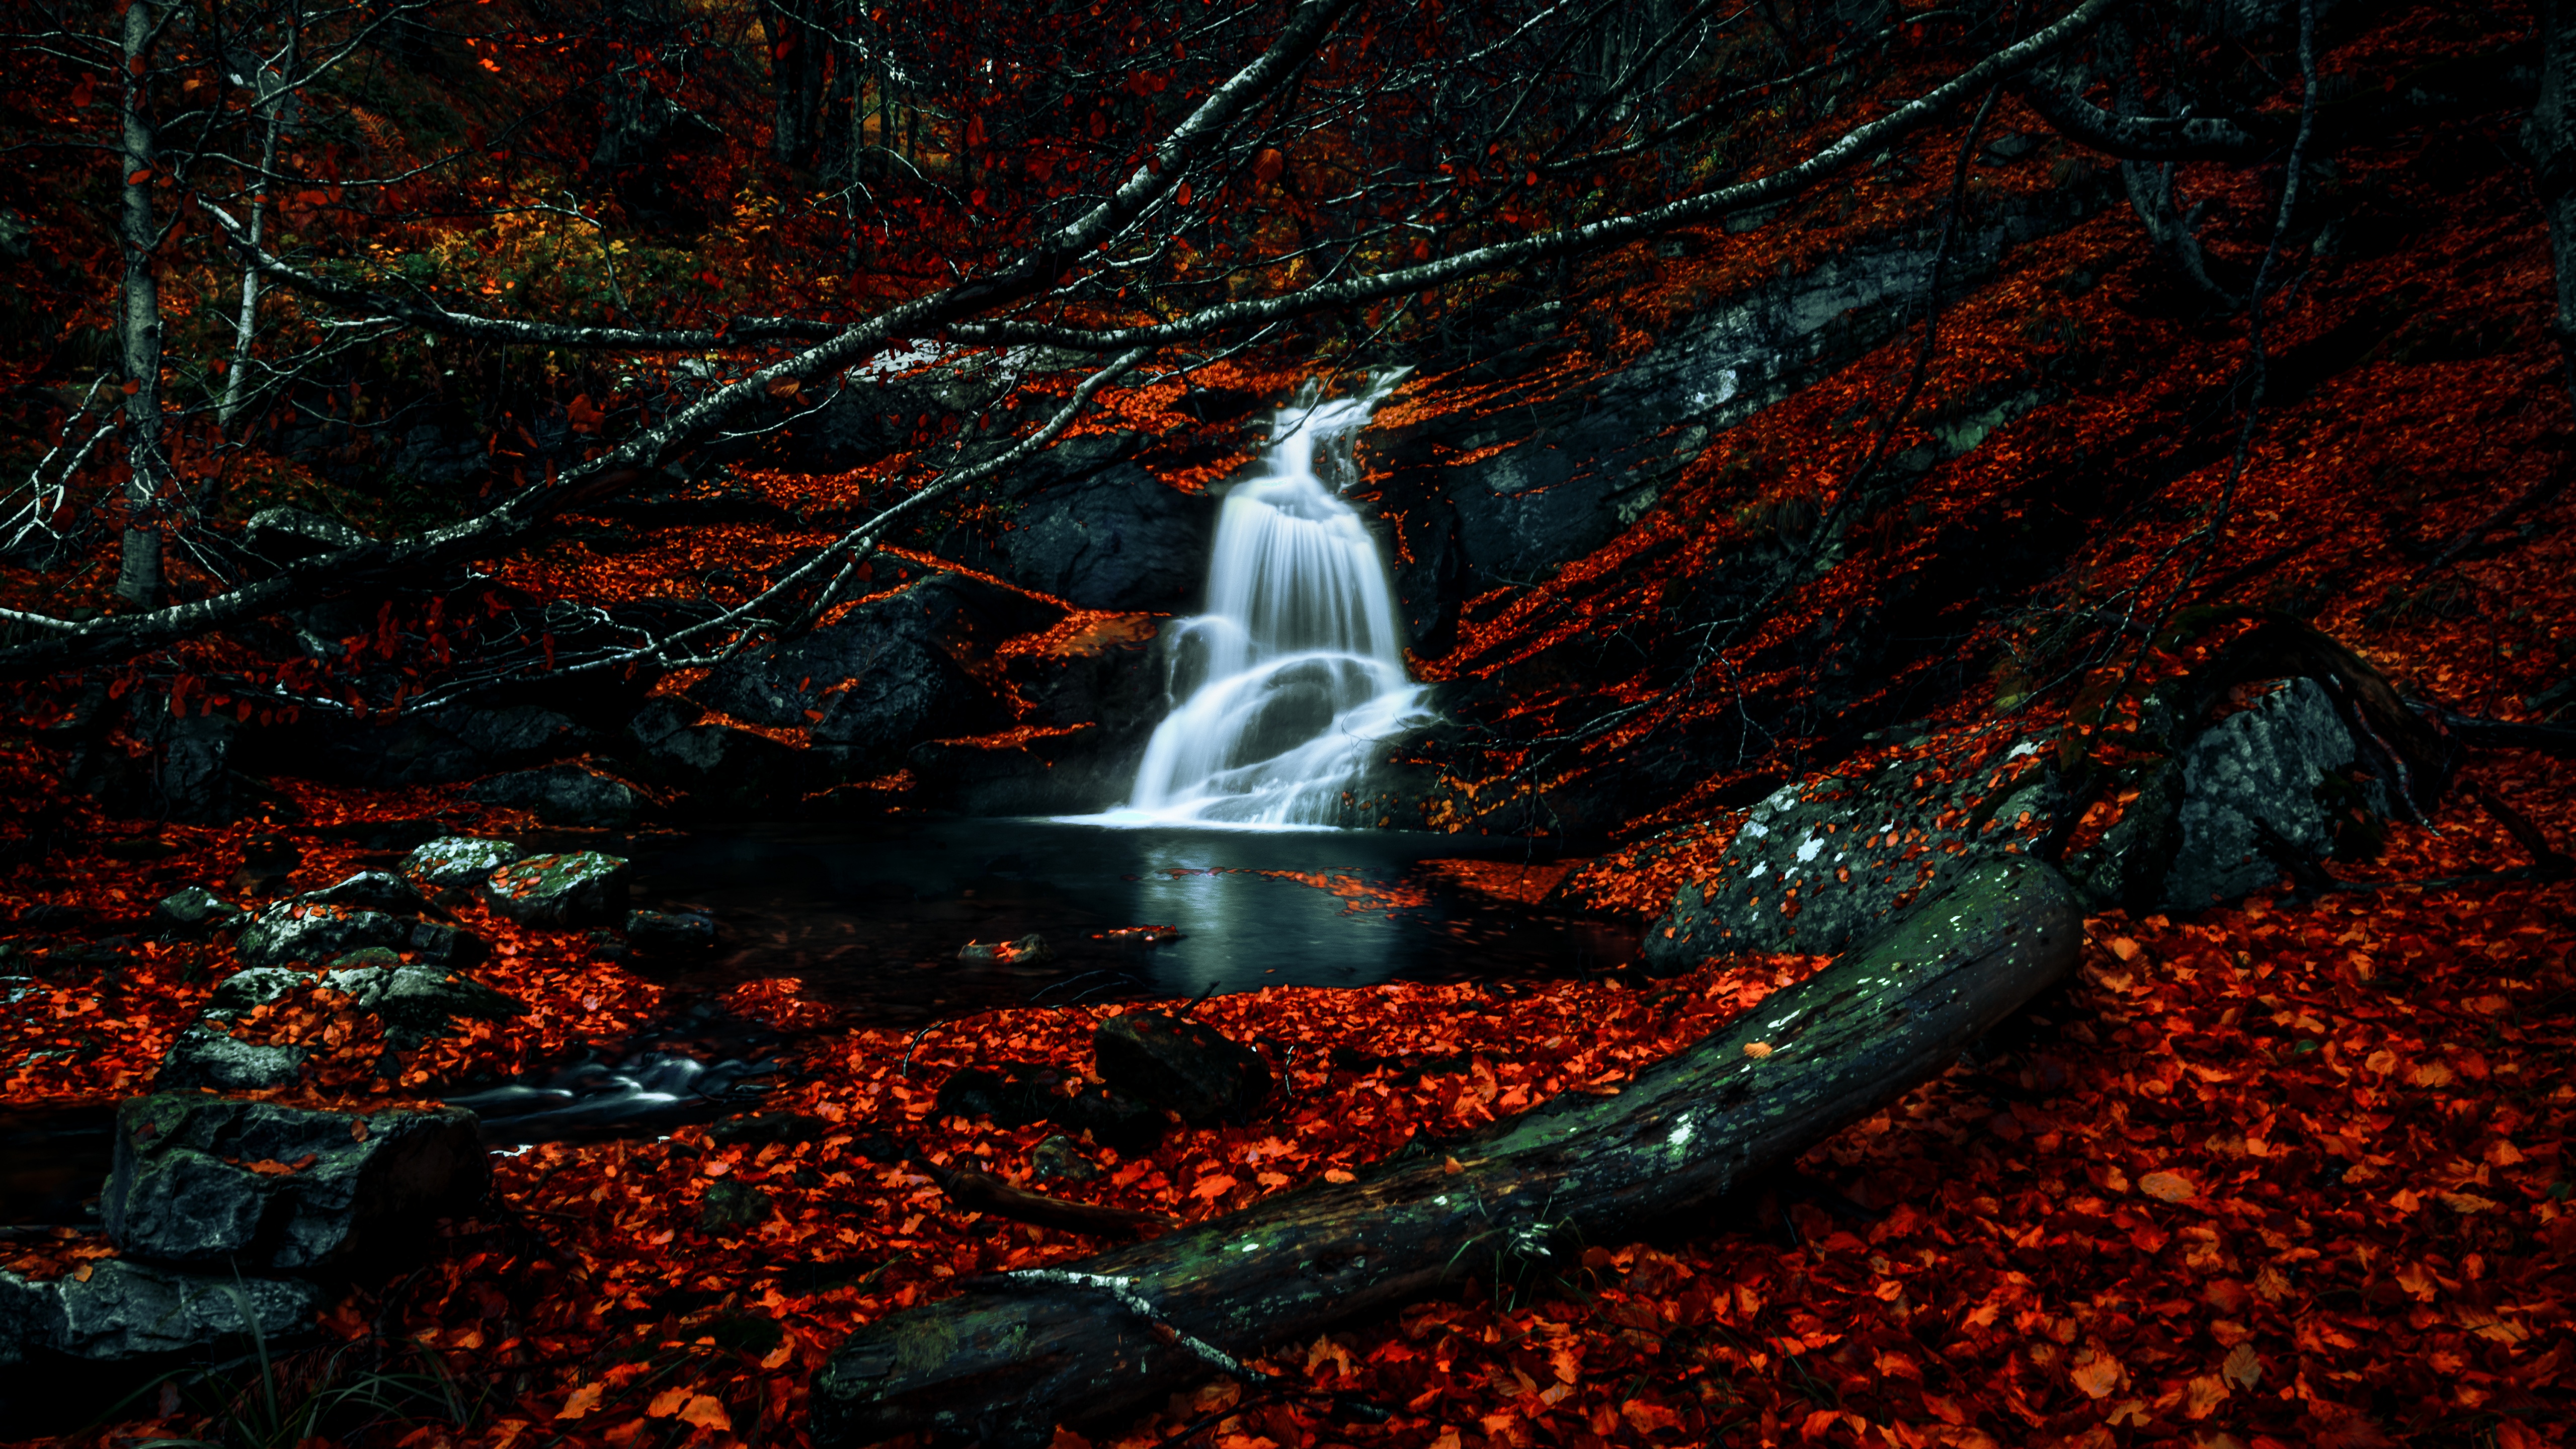 Waterfalls Wallpaper 4K, Autumn, Dark Forest, Foliage, Woods, Red leaves, Nature